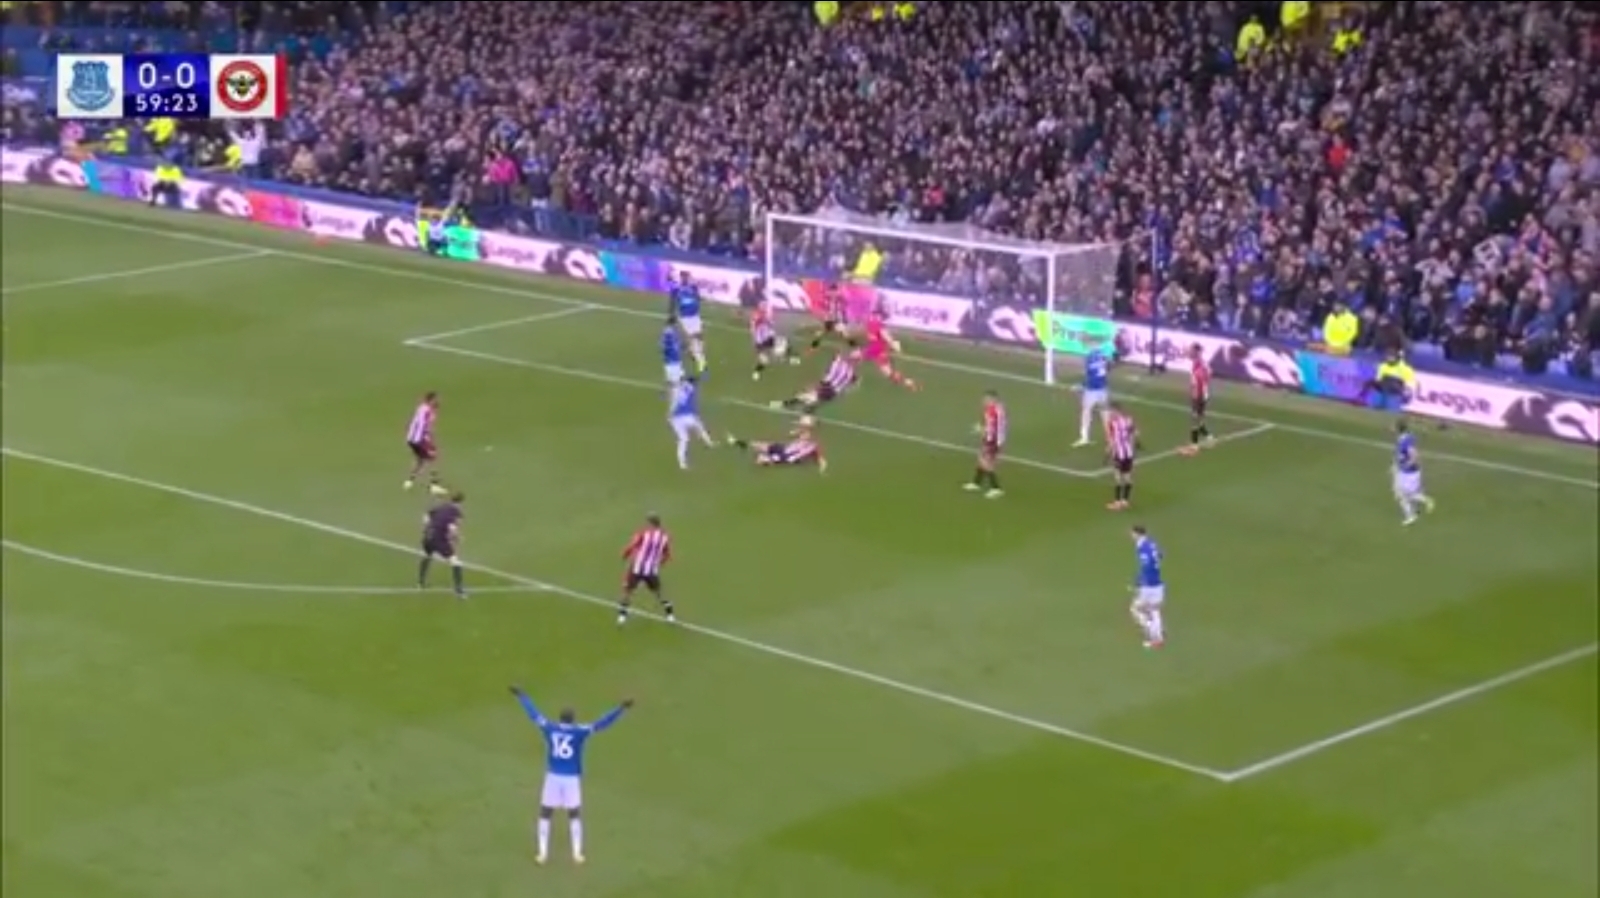 Watch: Gueye puts Everton in the lead against Brentford with a sumptuous finish